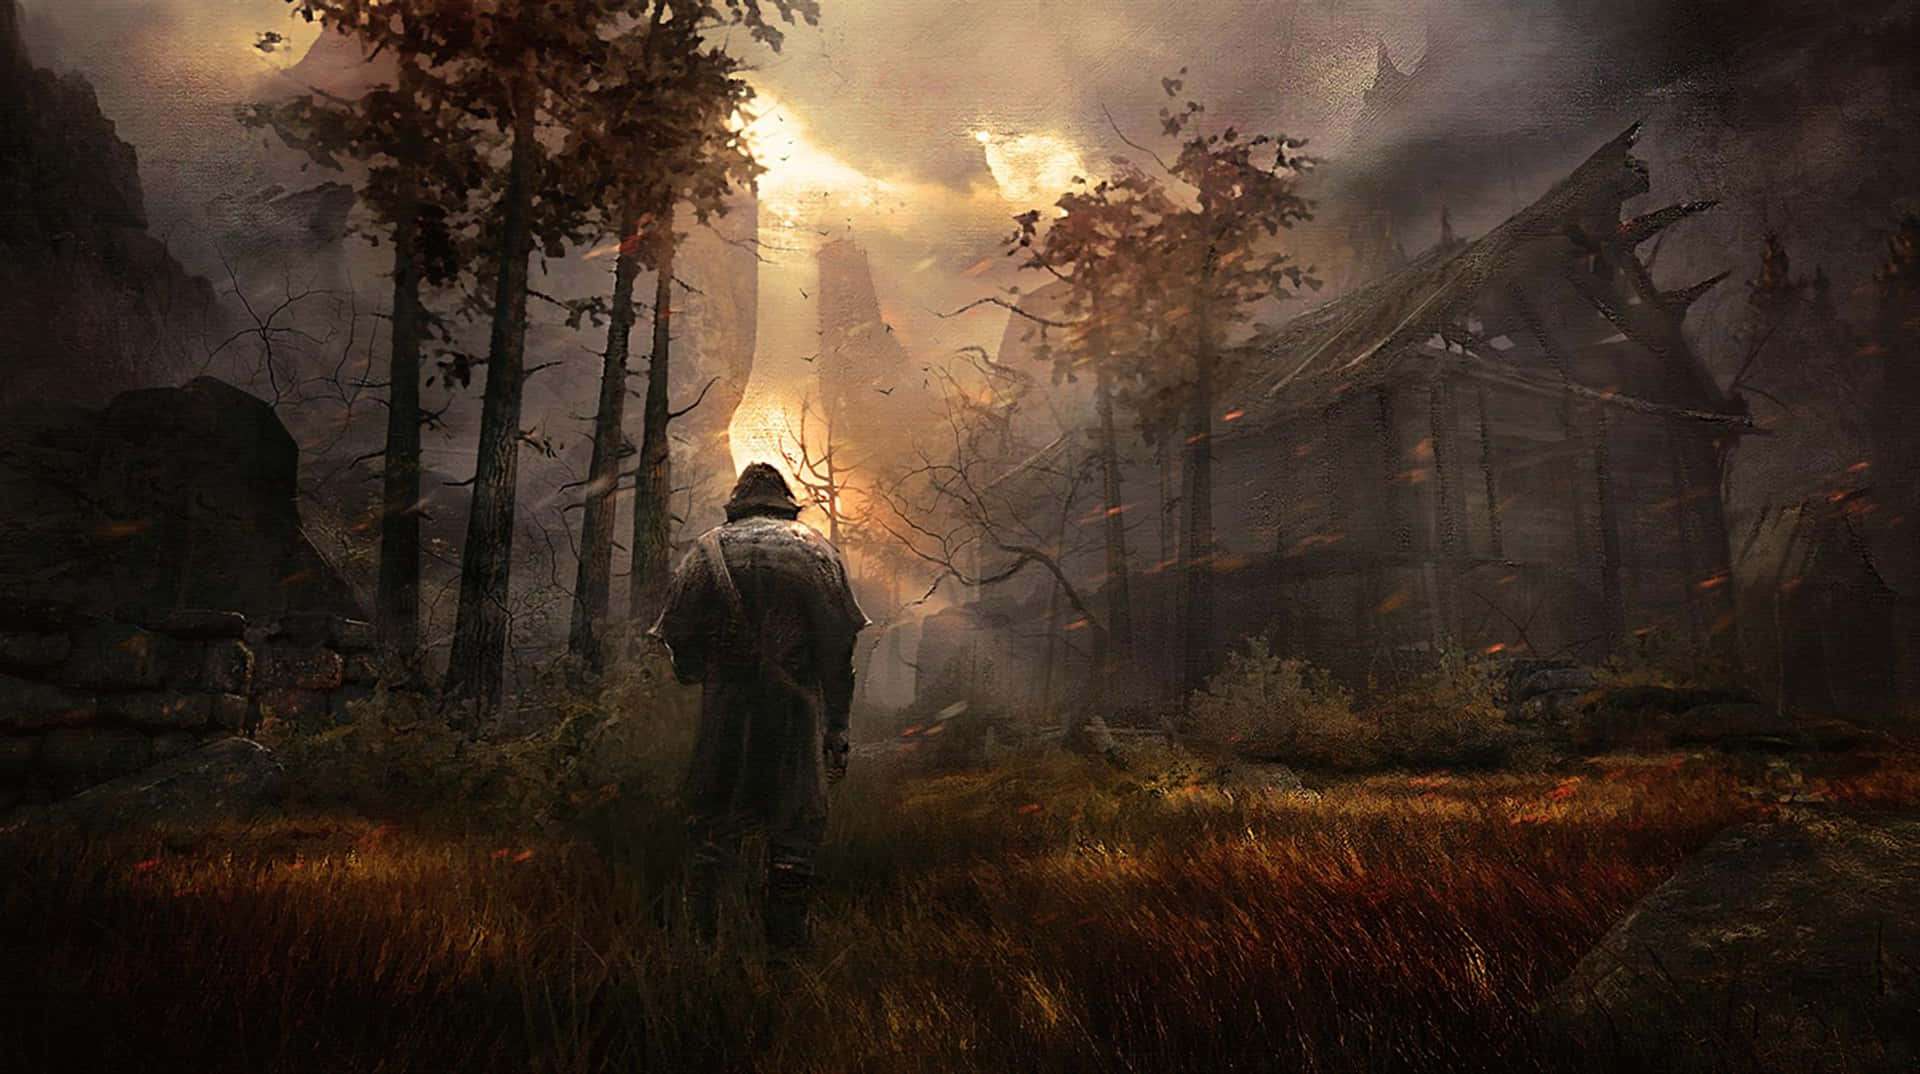 Hd Greedfall Background Warrior In The Woods